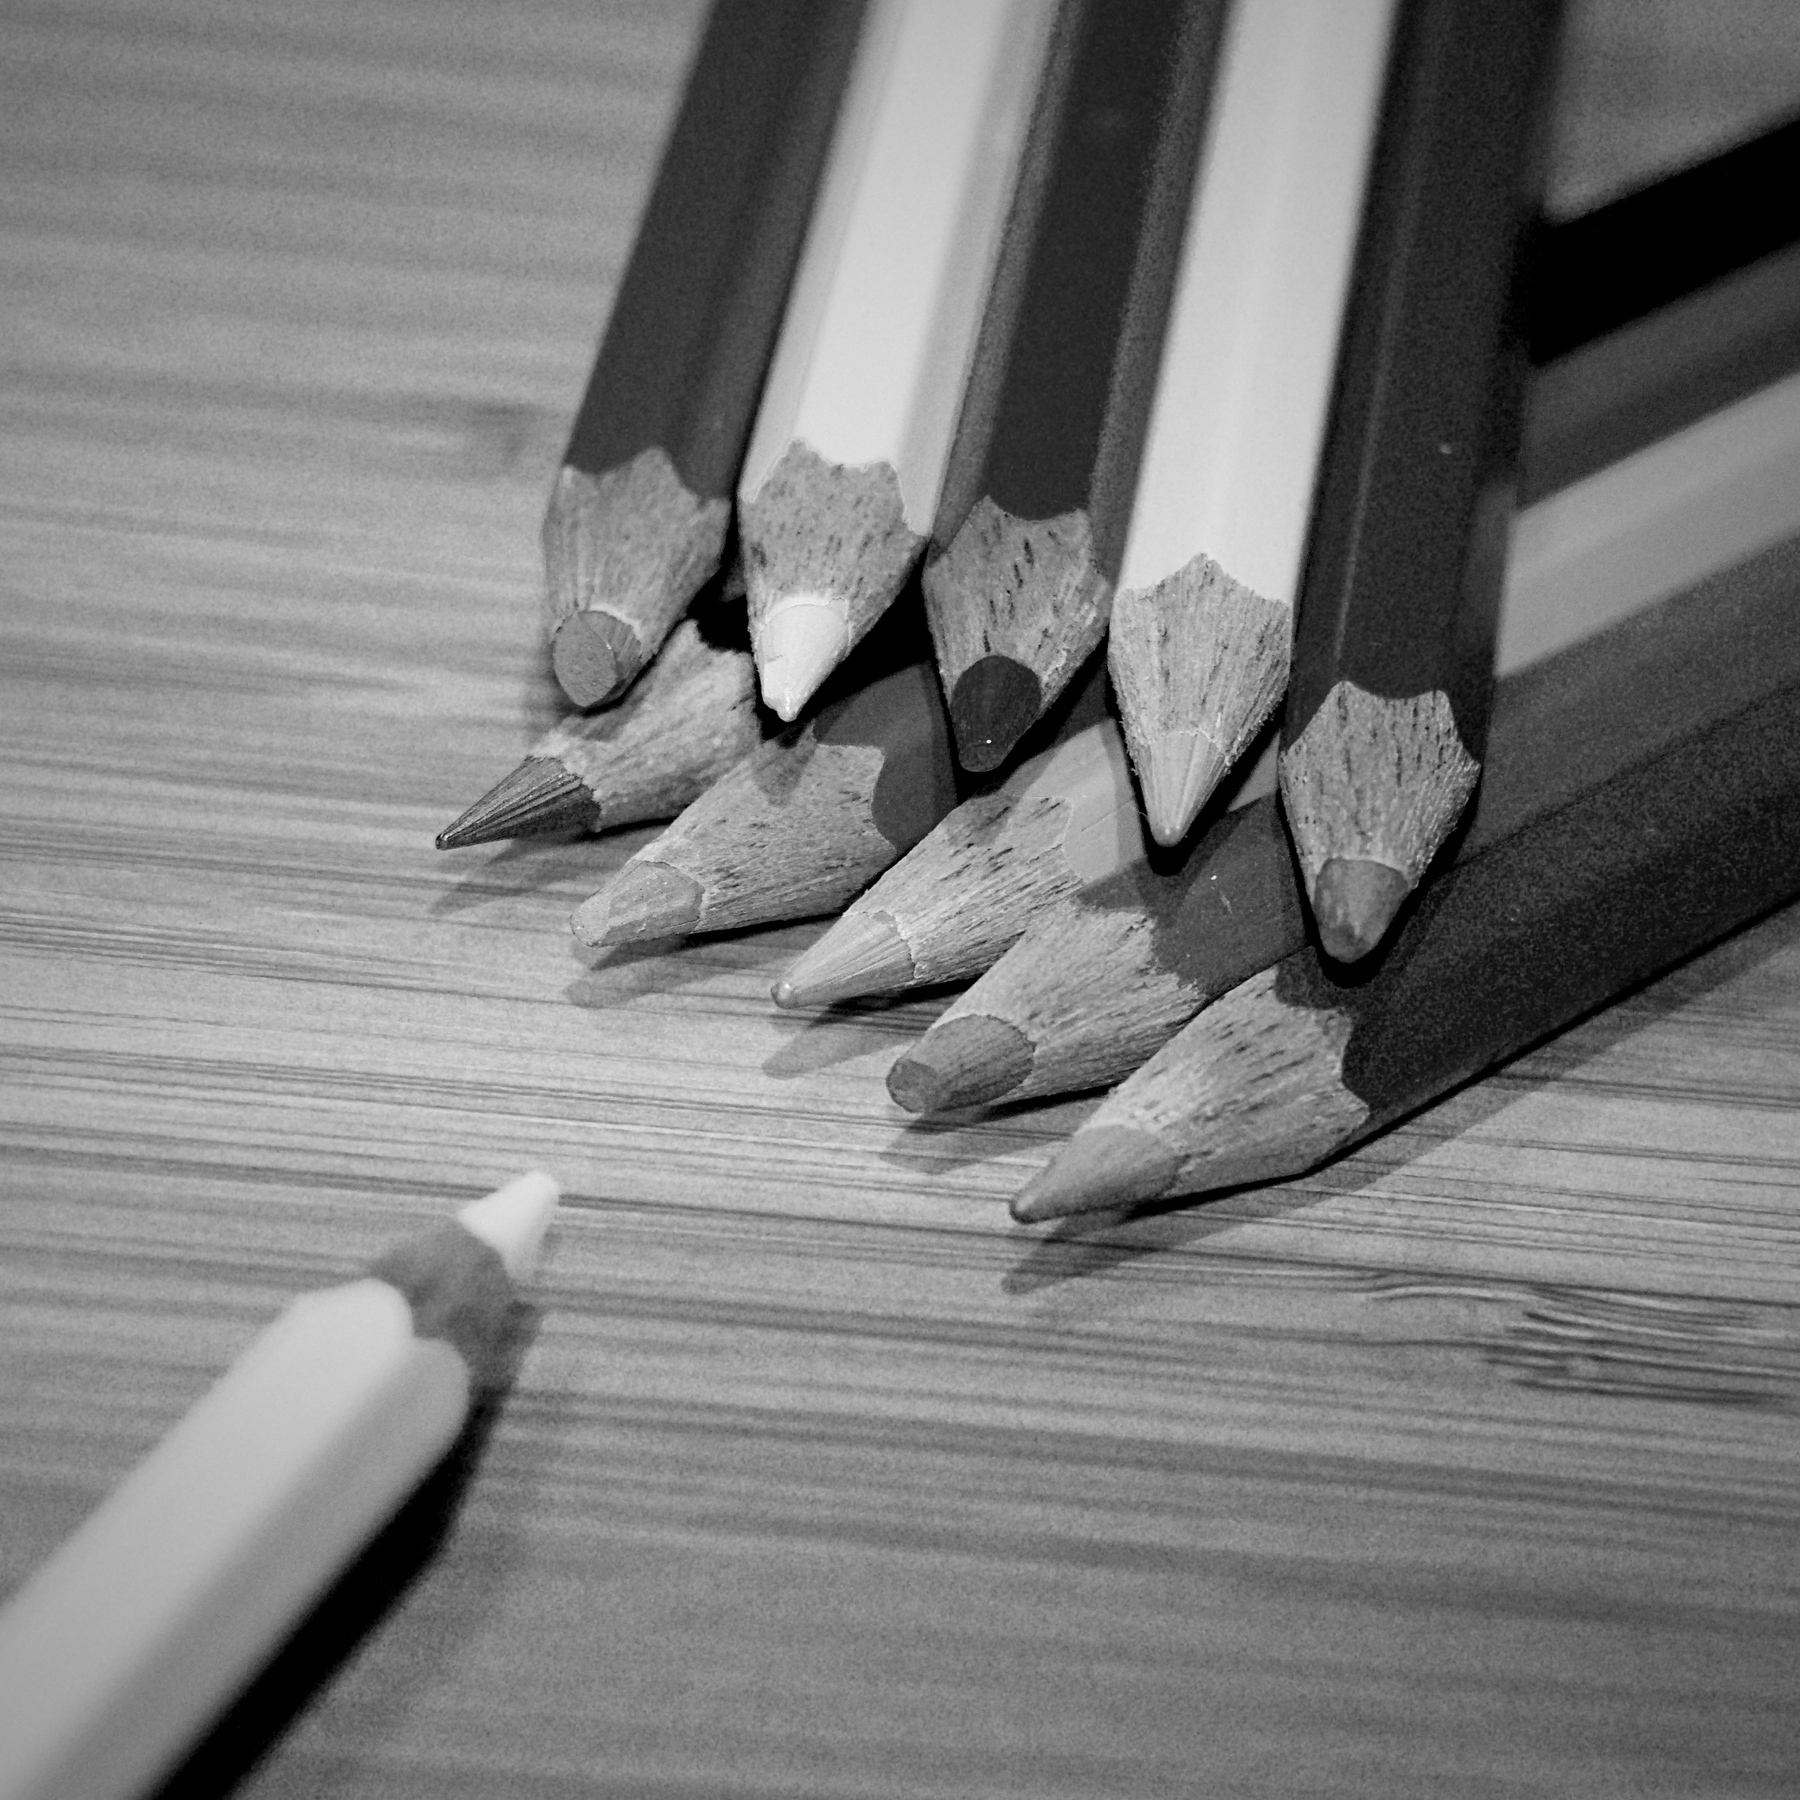 Black and white picture of colored pencils. At the top right, two rows of colored pencils lie on top of each other, another one protrudes into the picture from the bottom left.